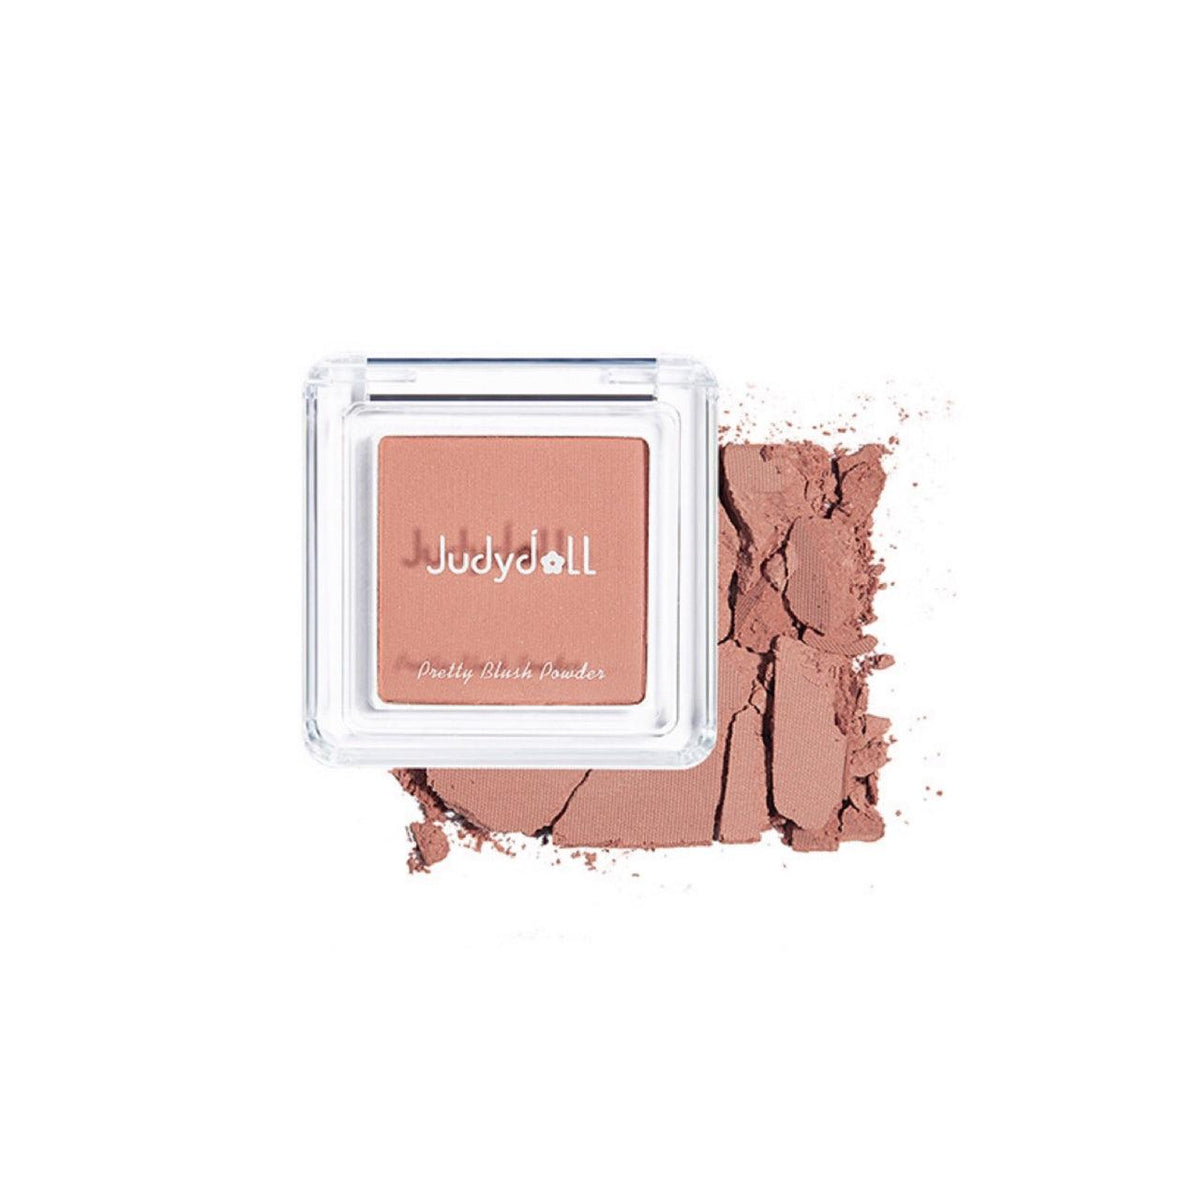 NEW! 48# 49# Judydoll Blush Highlighter Contouring for Beginners